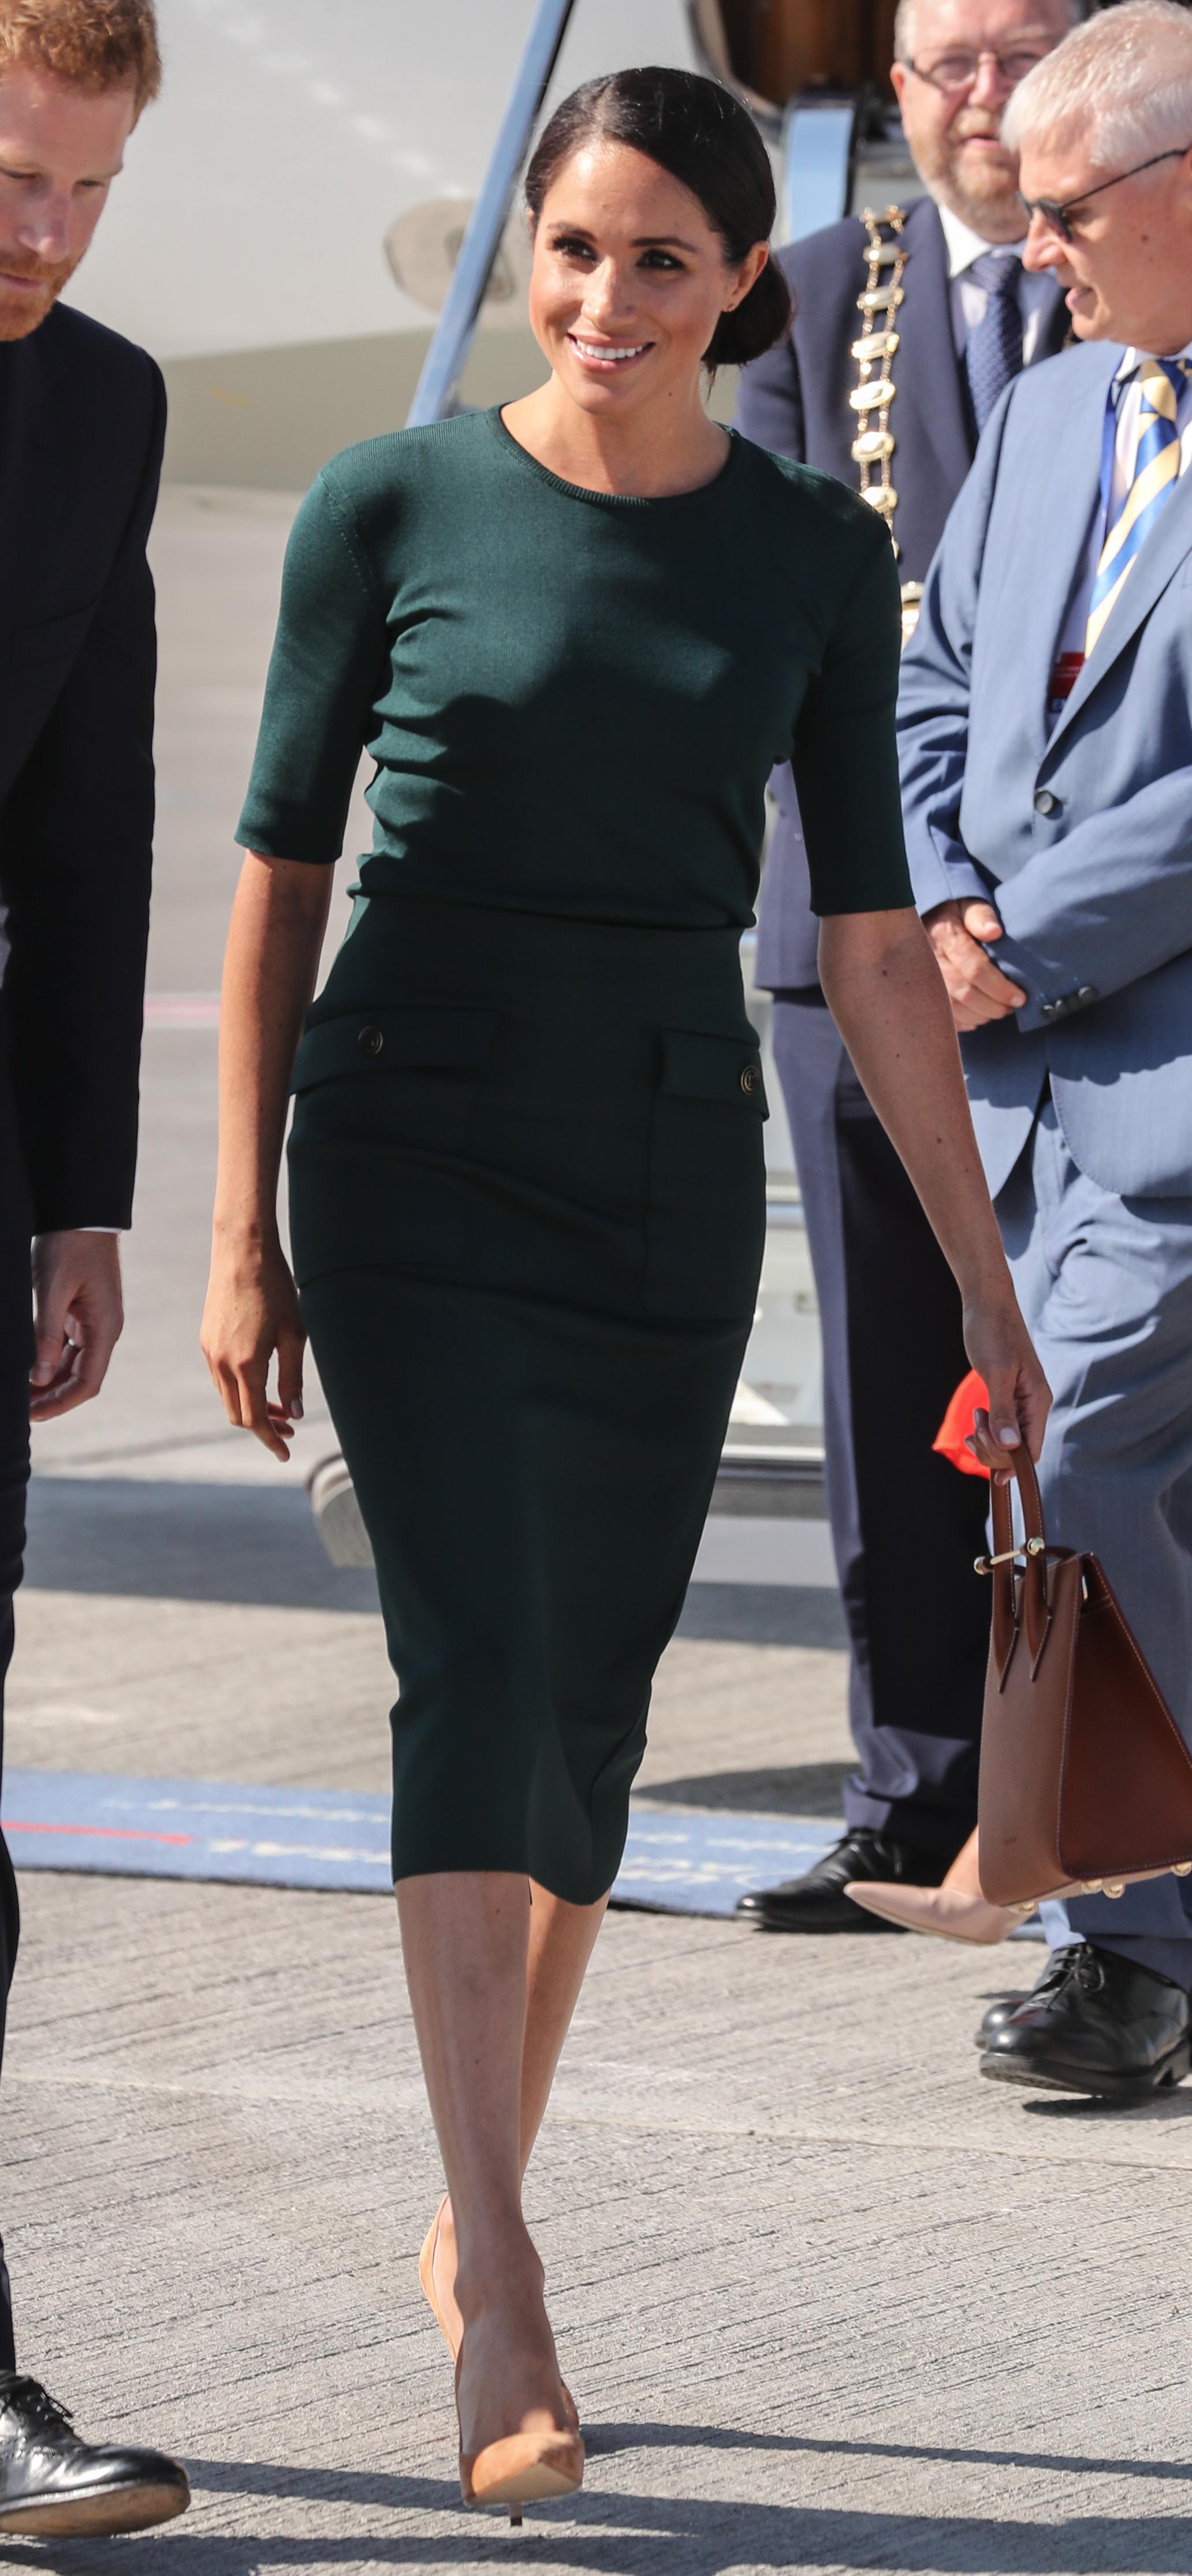 A Royal Year in Review - Breaking Down Meghan's Style in 2018